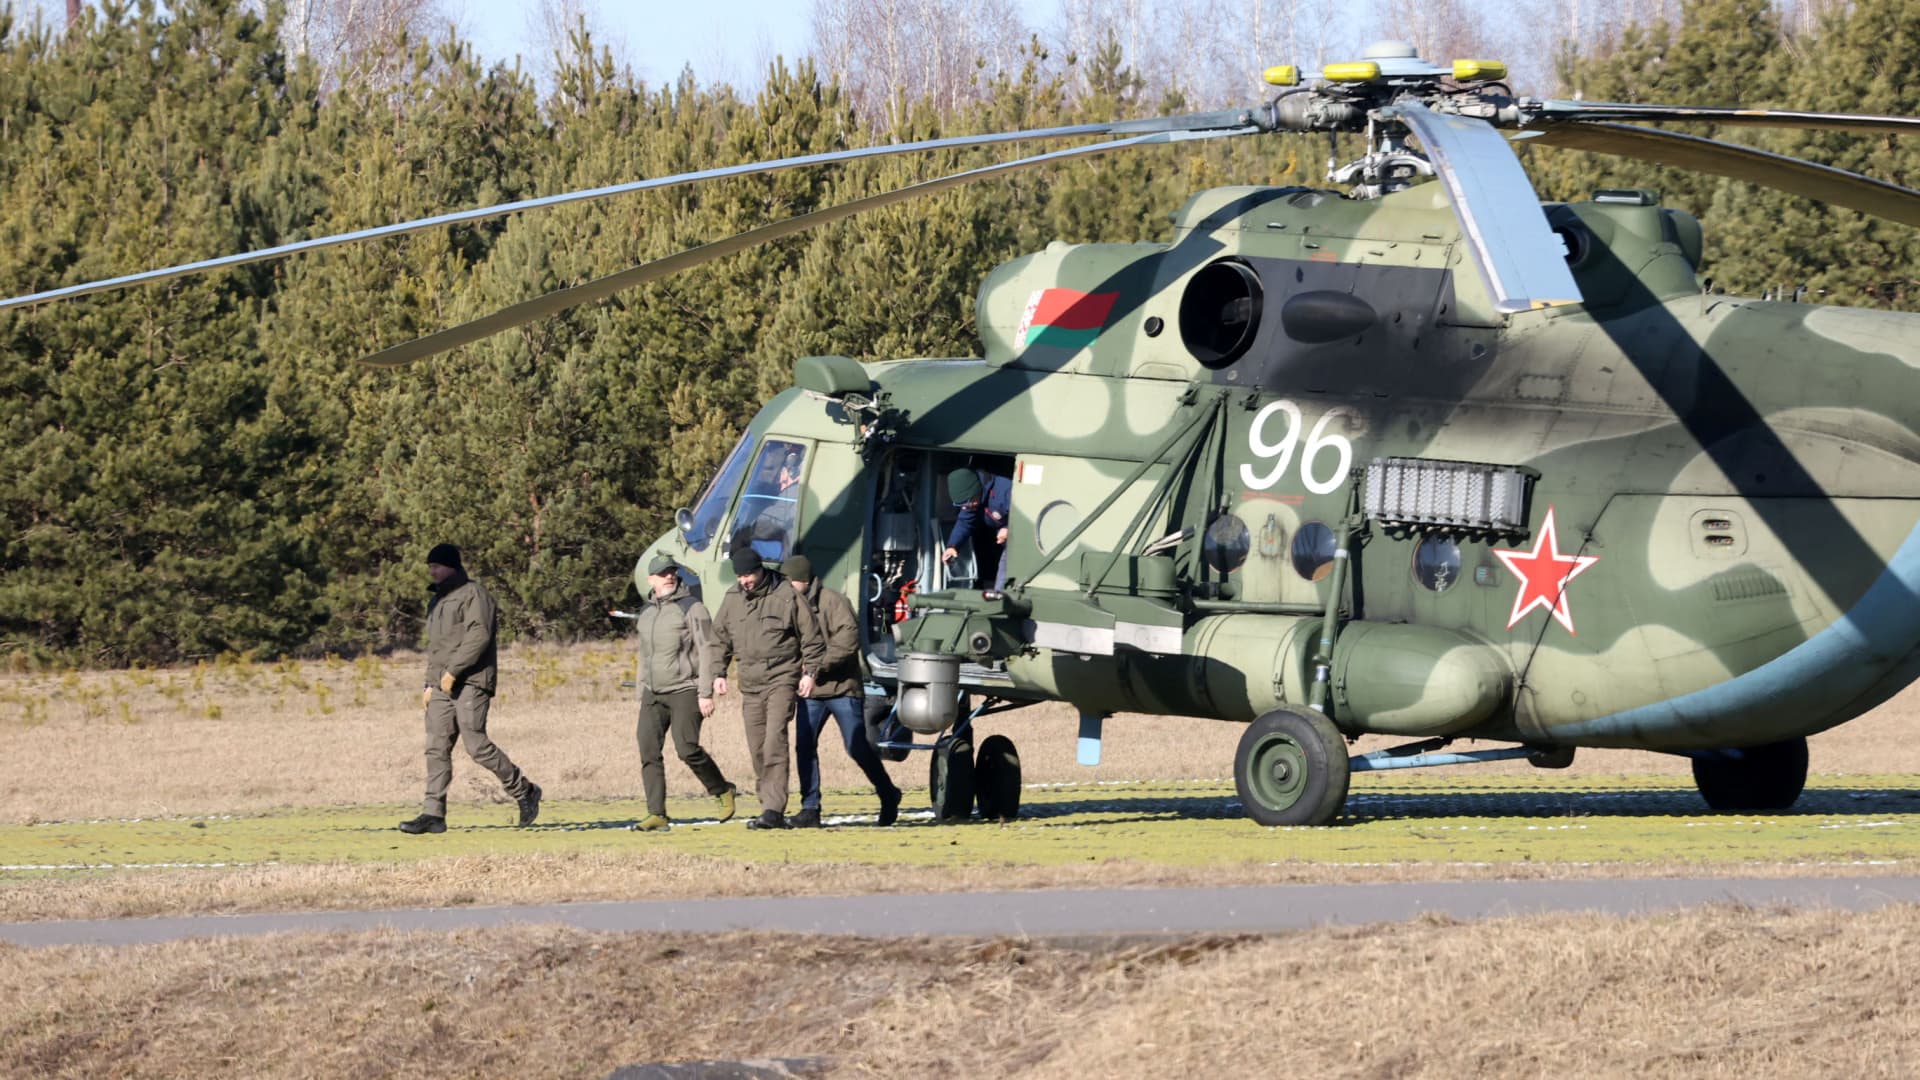 Members of the Ukrainian delegation disembark from a helicopter as they arrive for talks with Russian representatives in the Gomel region, Belarus February 28, 2022.